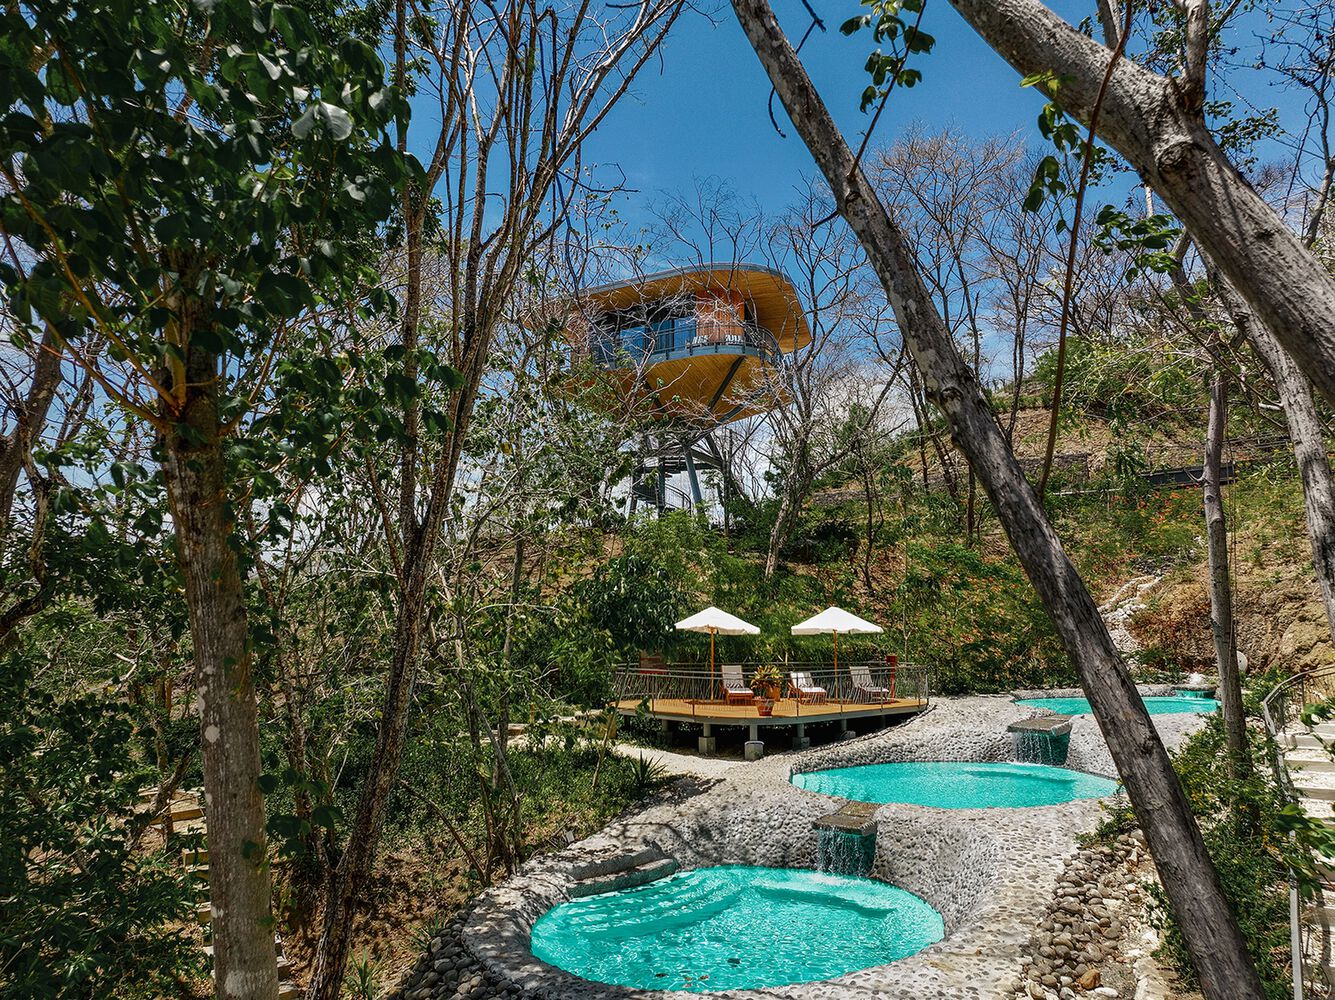 Suitree Experience Hotel: Architecture and Nature Coexist in Harmony